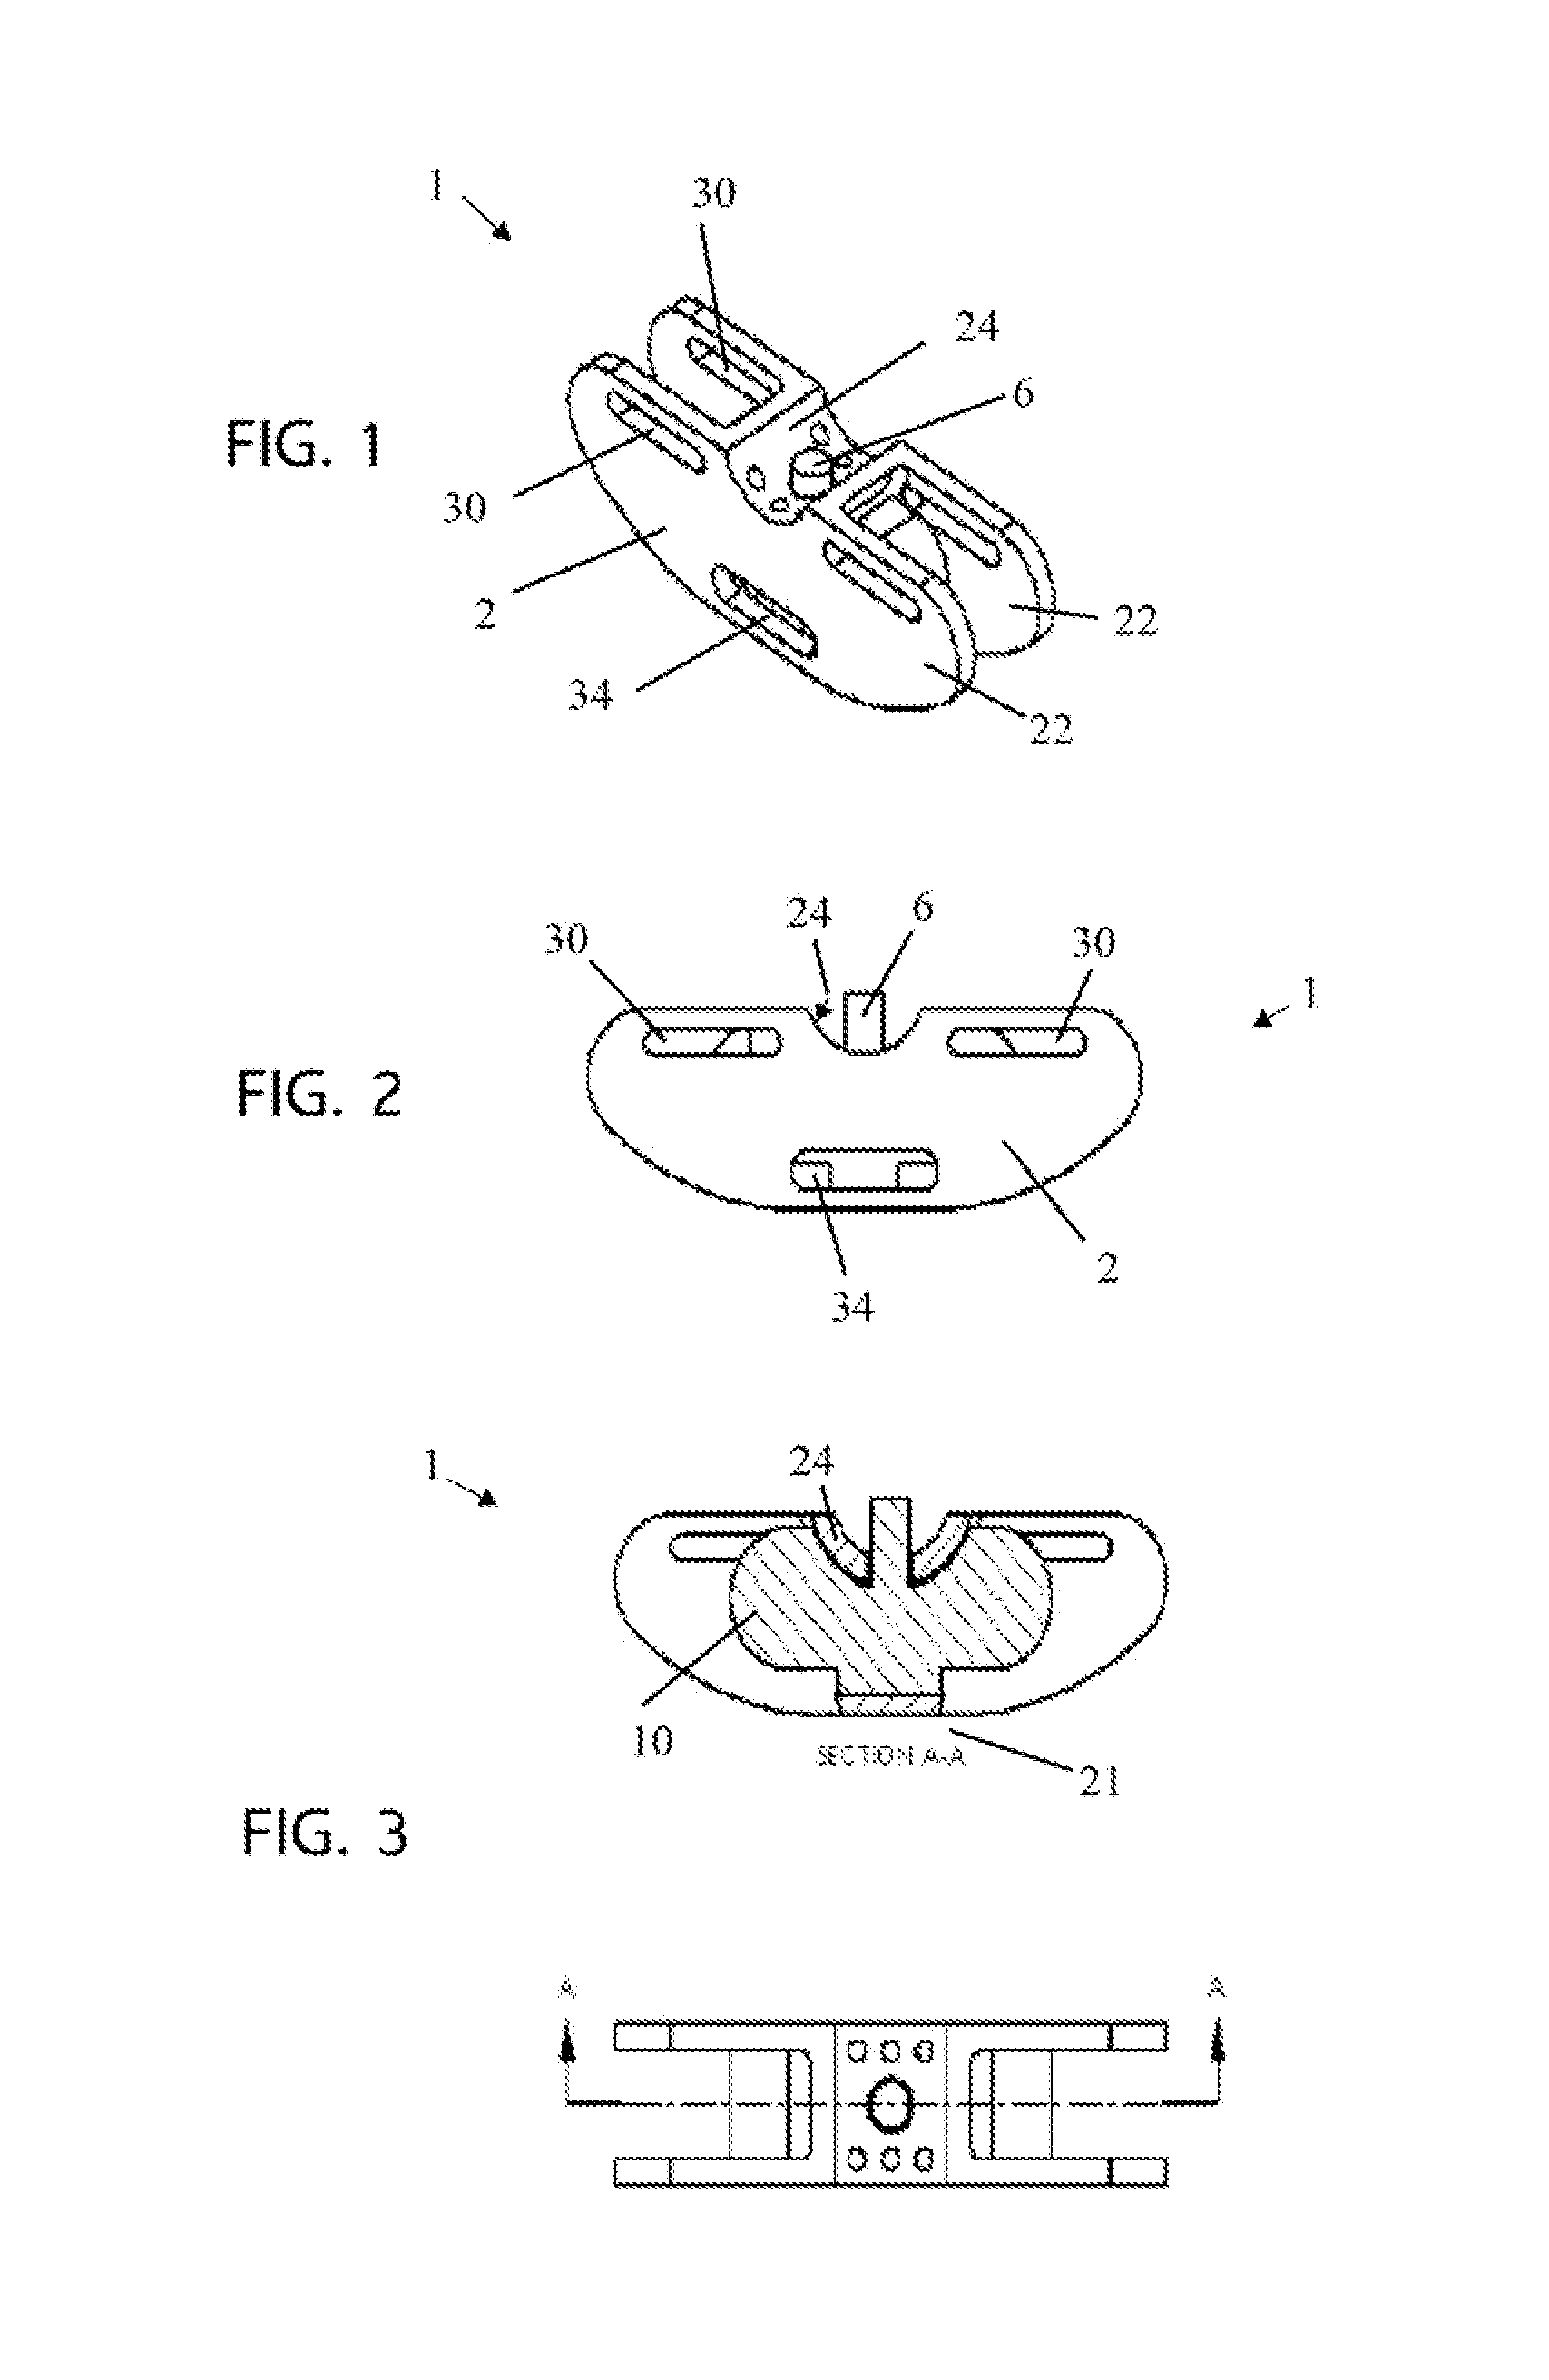 Dynamic Inter-Spinous Process Spacer